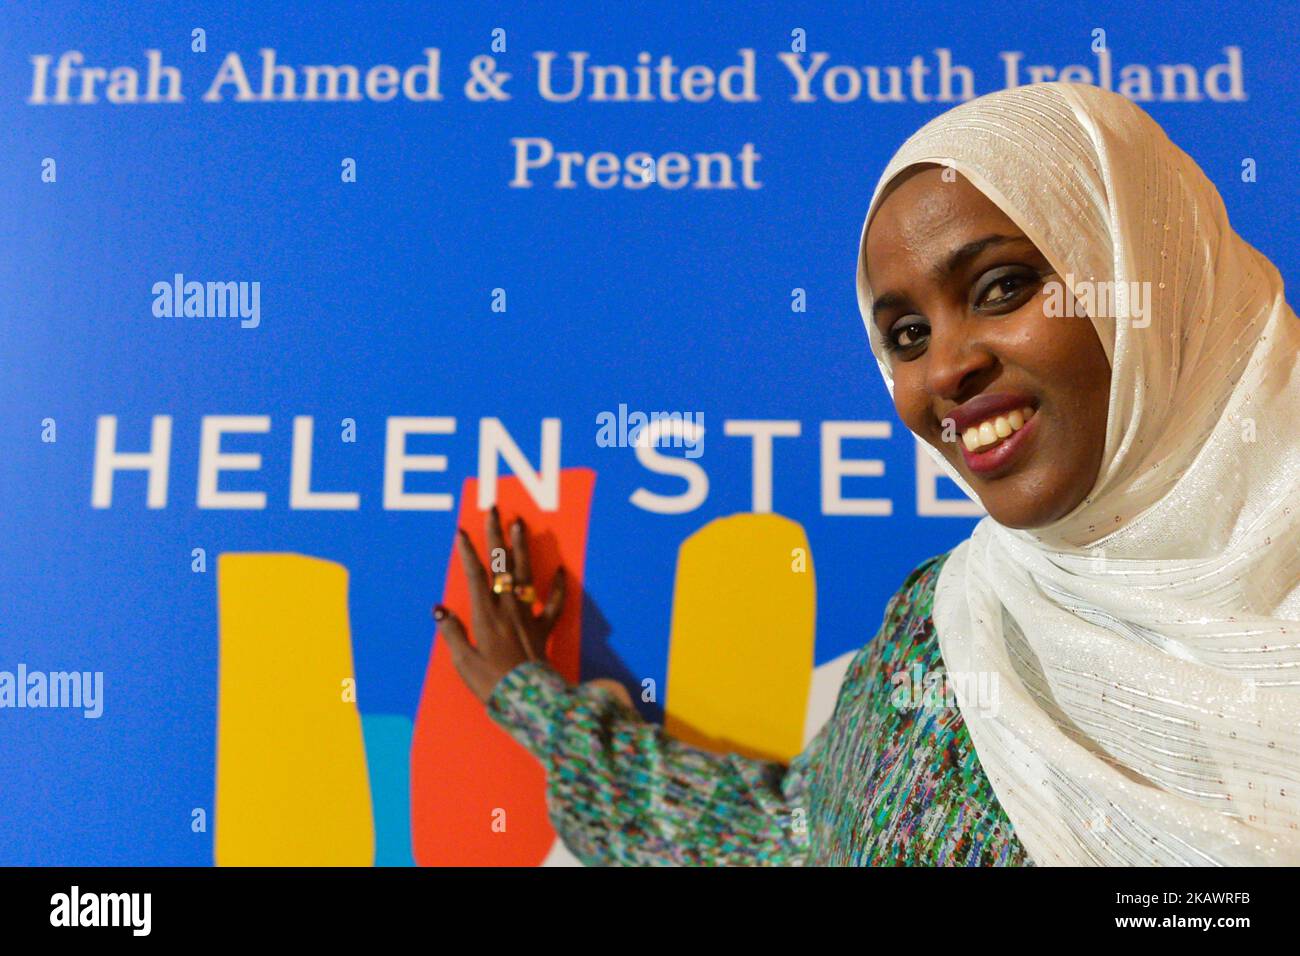 Ifrah Ahmed during an on set photo call, which has just commenced in Dublin for the Pembridge Pictures and Umedia production of ‘A Girl from Mogadishu’ – a true story based on the testimony of her life. Born into a refugee camp in war-torn Somalia, Ifrah was trafficked to Ireland as a teenager. Recounting her traumatic childhood experiences of Female Genital Mutilation / Cutting (FGM/C) when applying for refugee status, she was again traumatized and decided to devote her life to the eradication of the practice. Ifrah emerged as one of the world’s foremost international activists against Gende Stock Photo